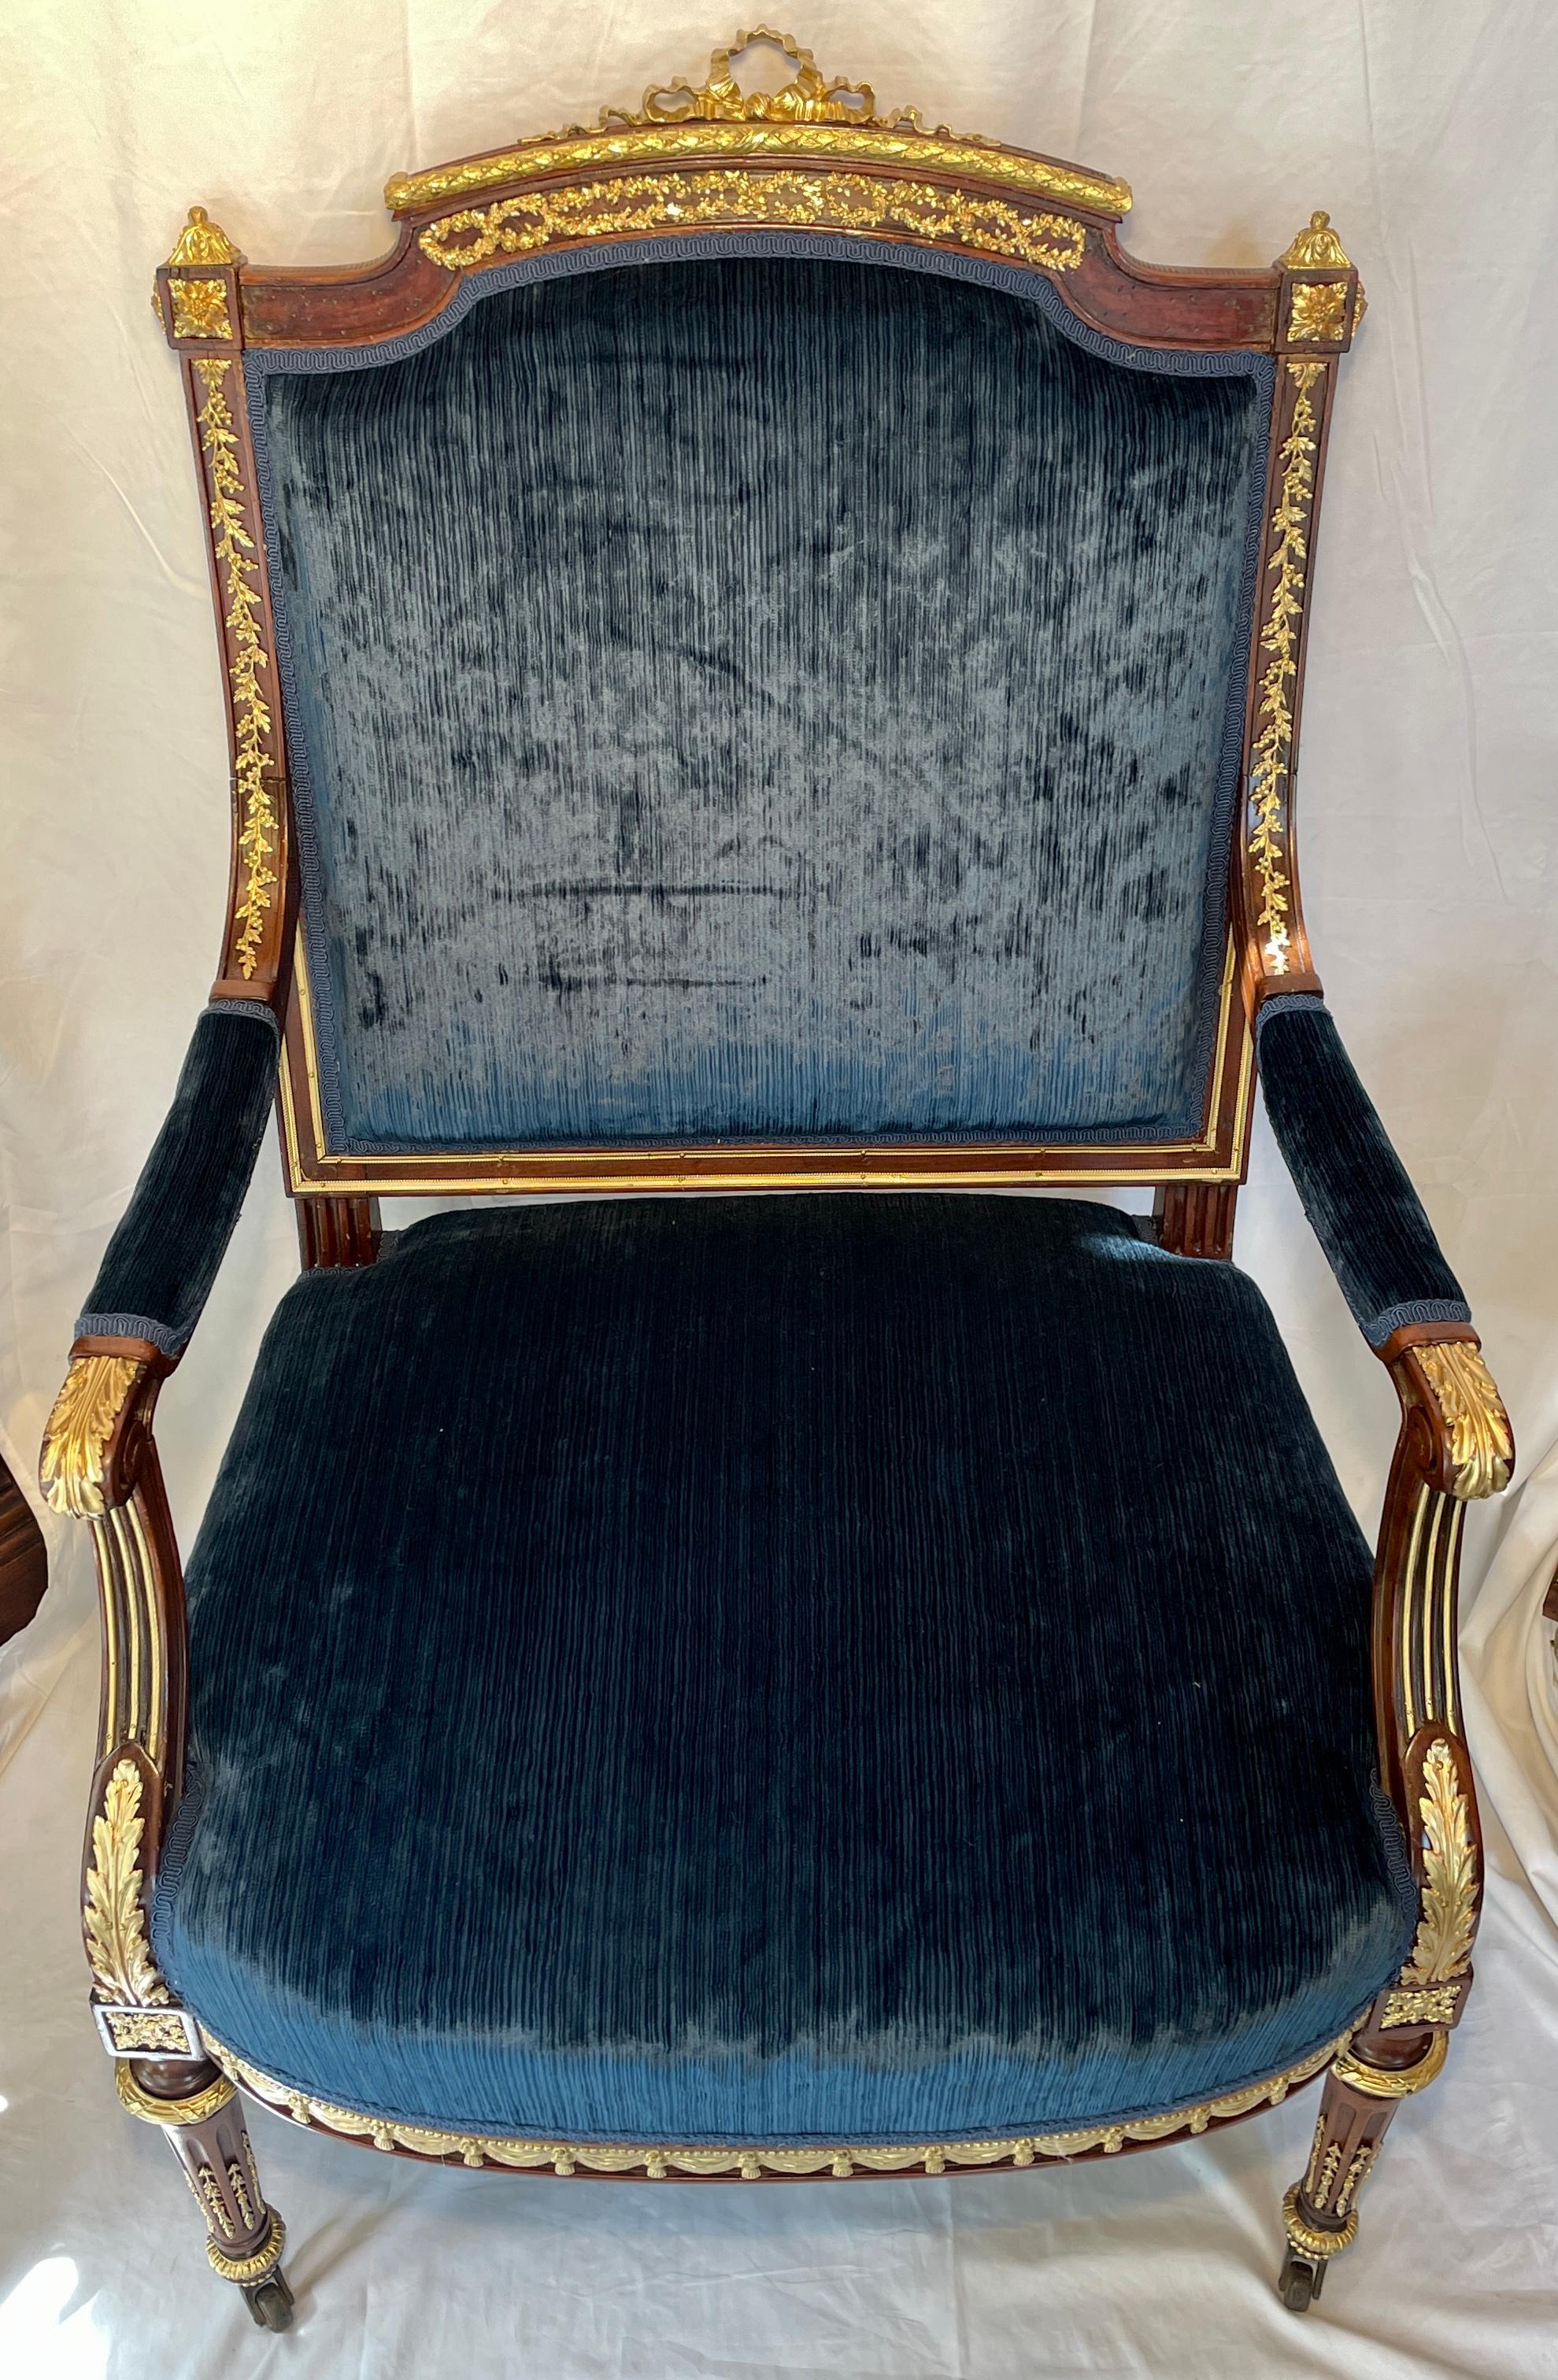 Antique French gold bronze mounted mahogany armchair with delicate trim, circa 1875-1885.